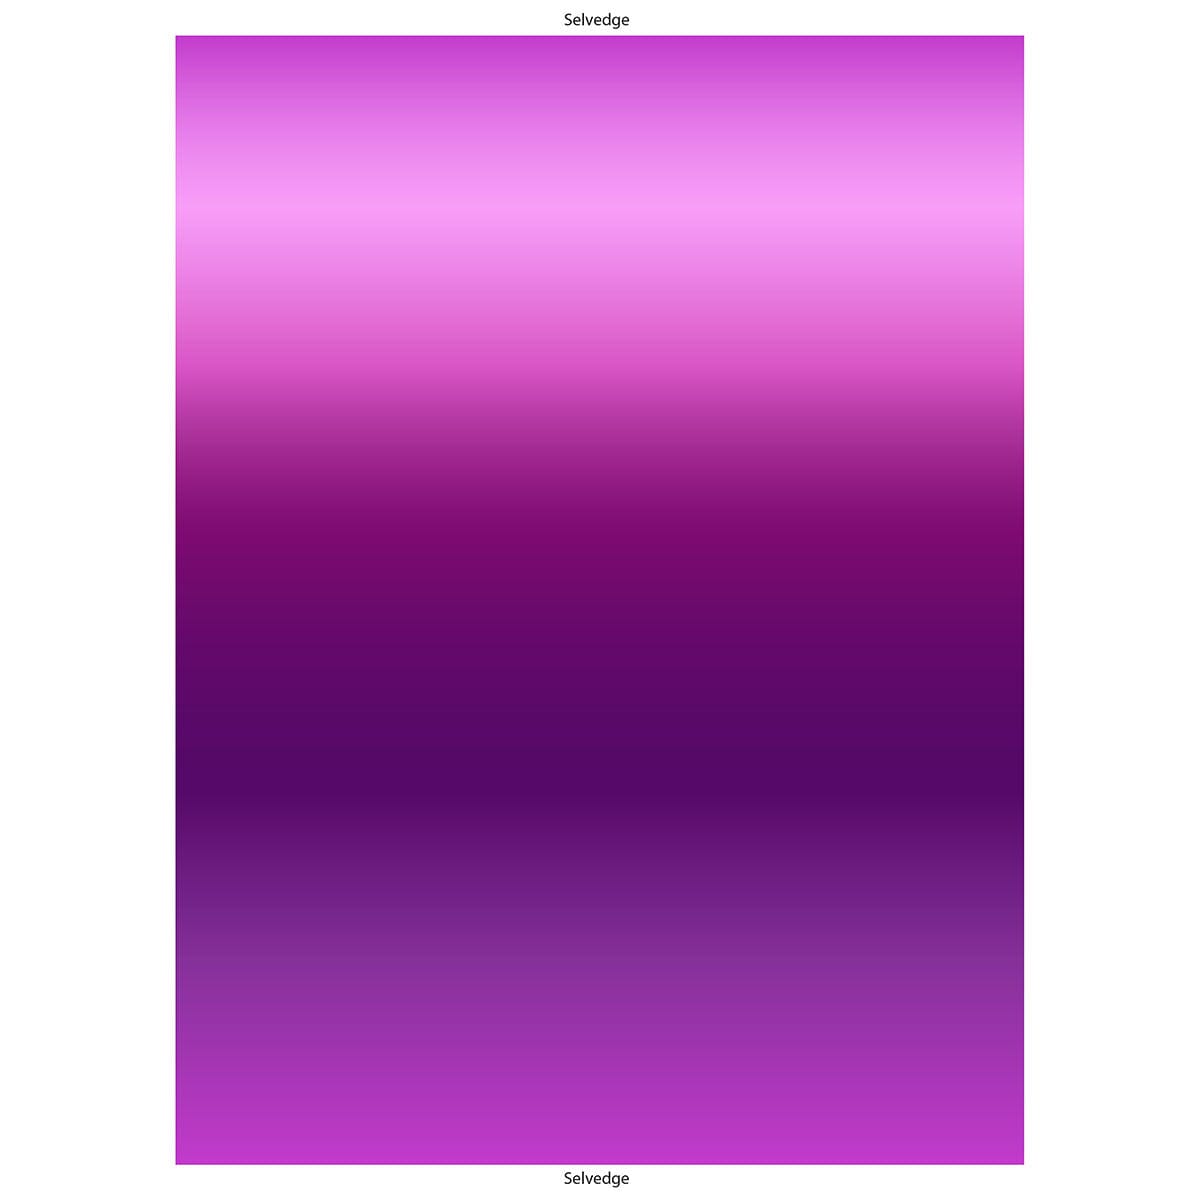 Lewis And Irene Fabric Ombre Purple A444.8